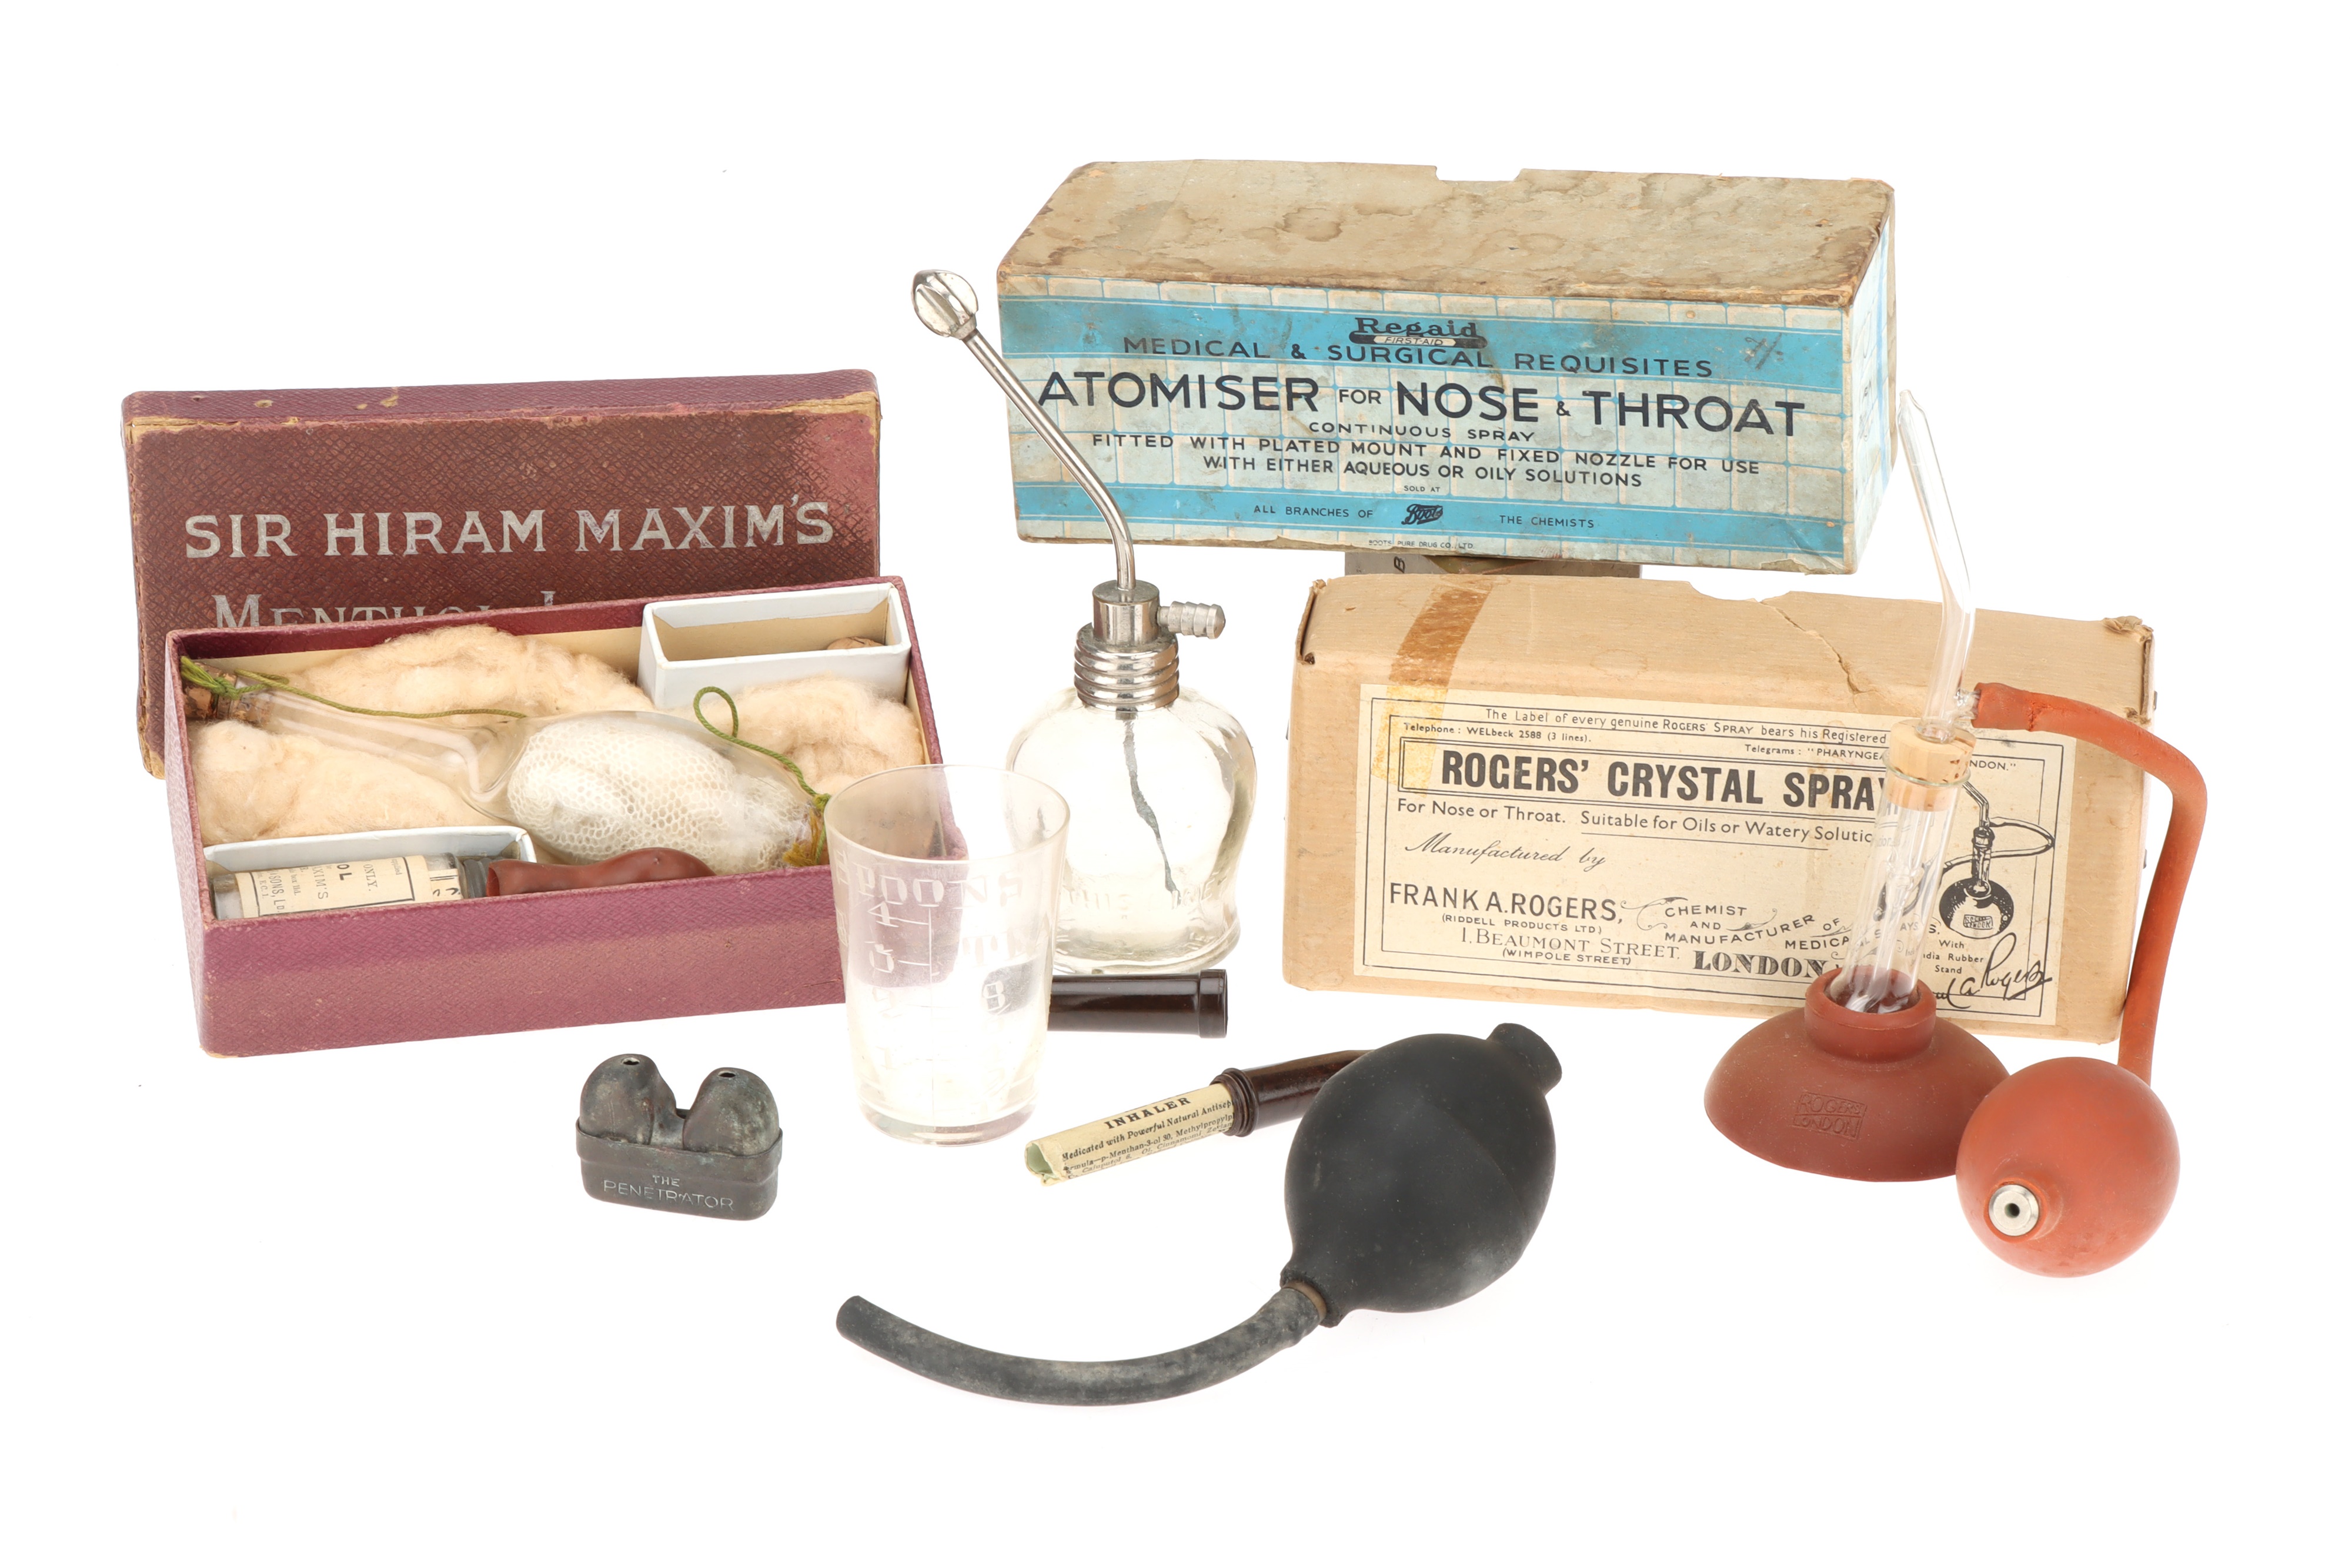 Medical/Apothecary, Antique Inhalers and Sprays